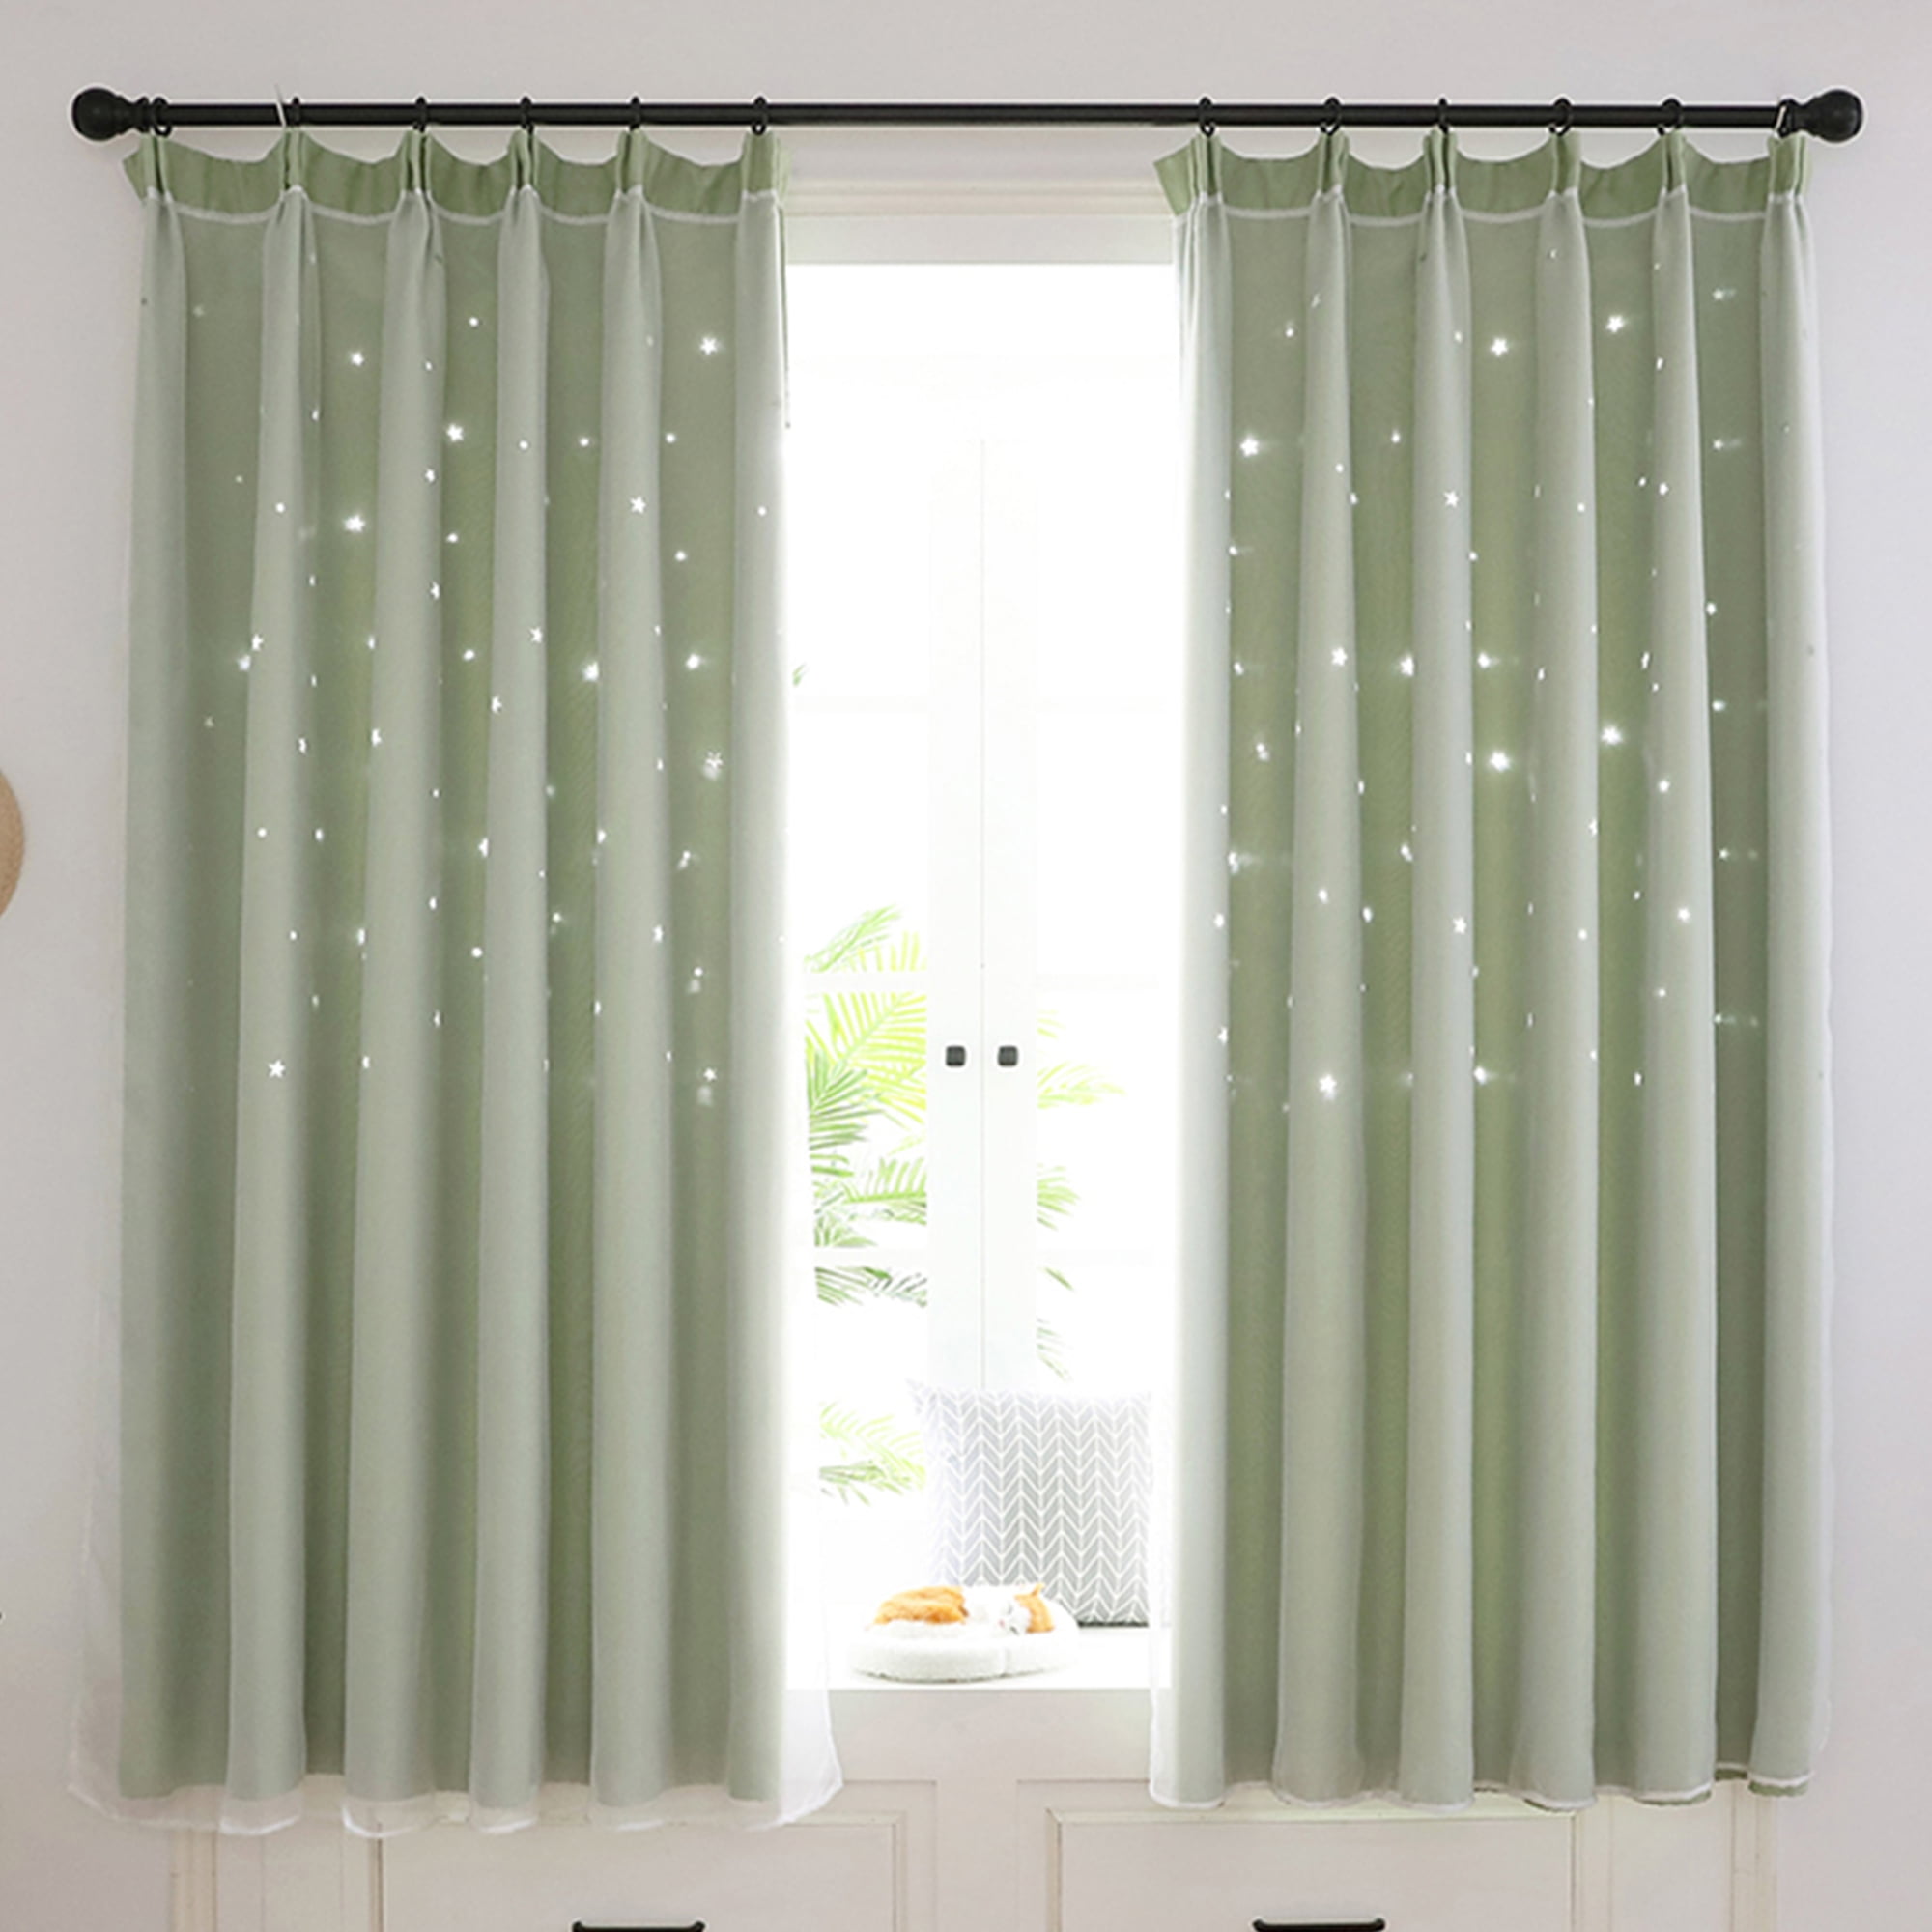 Beautiful Blackout Curtains Colorful Double Layer Curtains f/ Kids Bedroom P5X6 